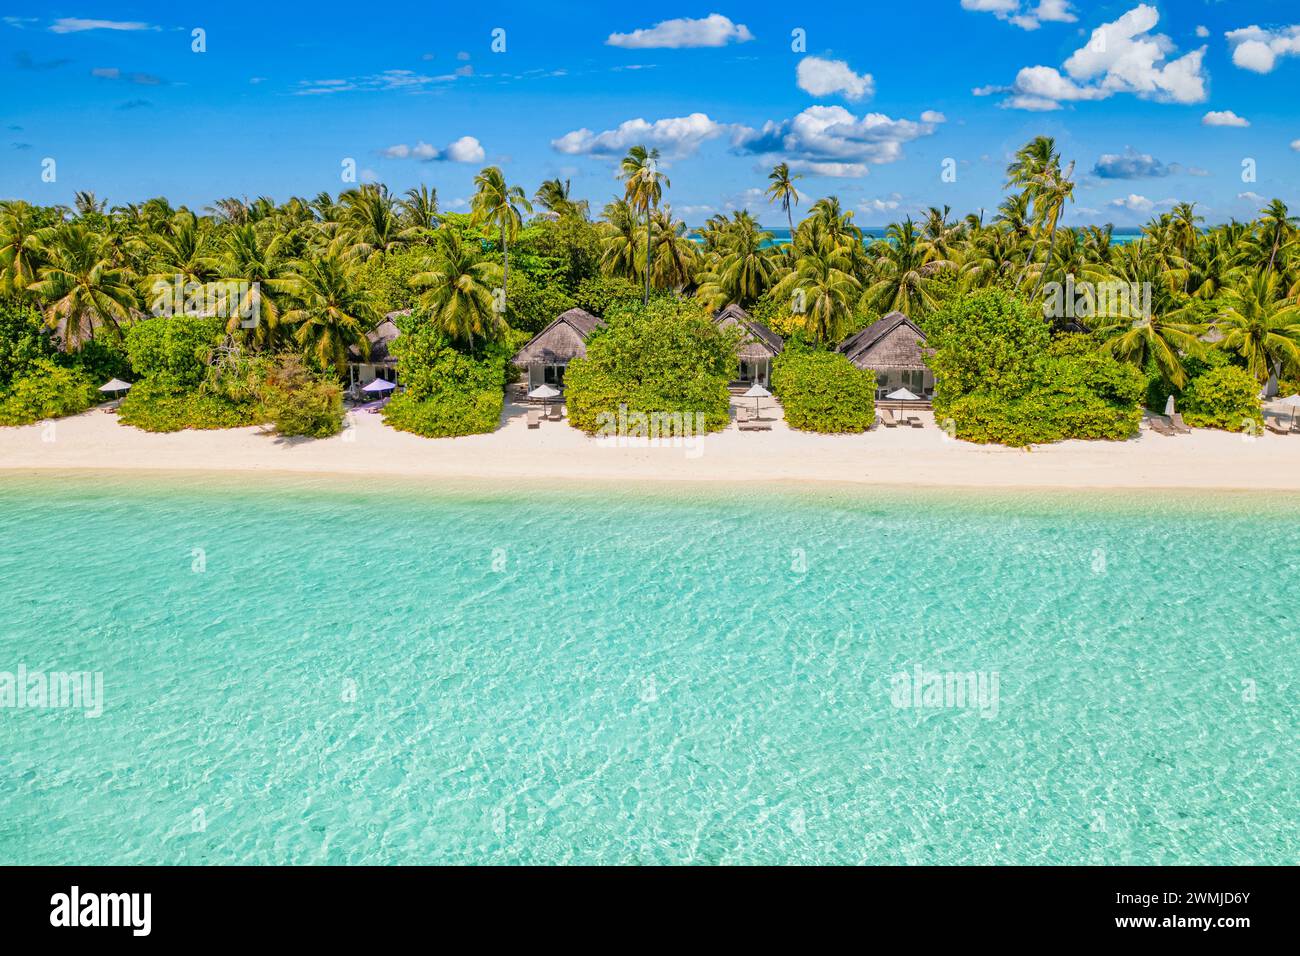 Amazing island beach. Maldives from aerial view tranquil tropical landscape seaside with palm trees on white sandy beach. Exotic nature shore, luxury Stock Photo